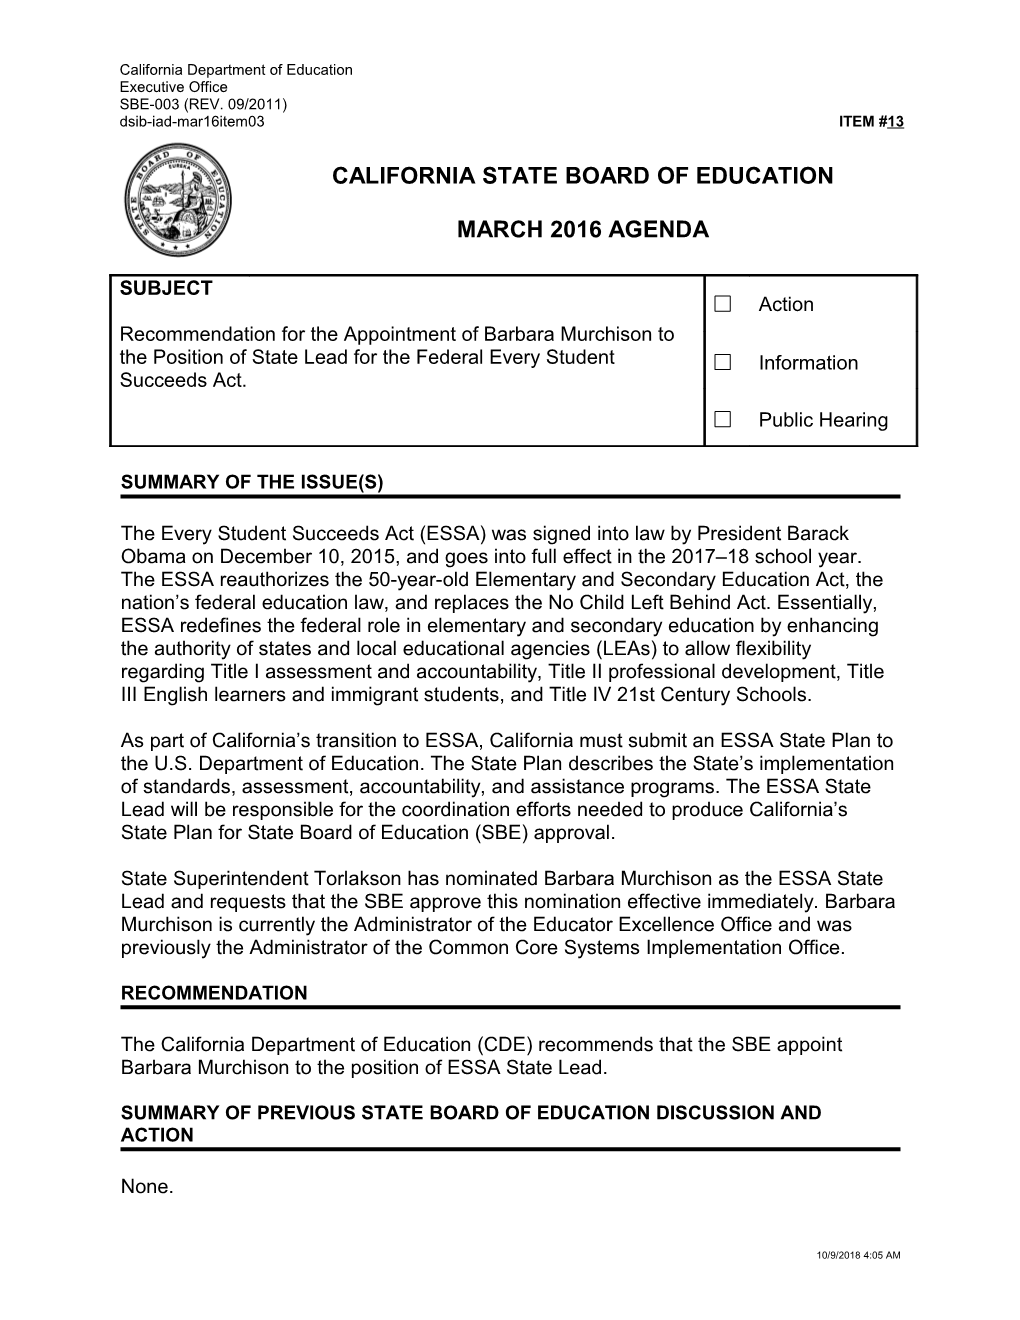 March 2016 Agenda Item 13 - Meeting Agendas (CA State Board of Education)